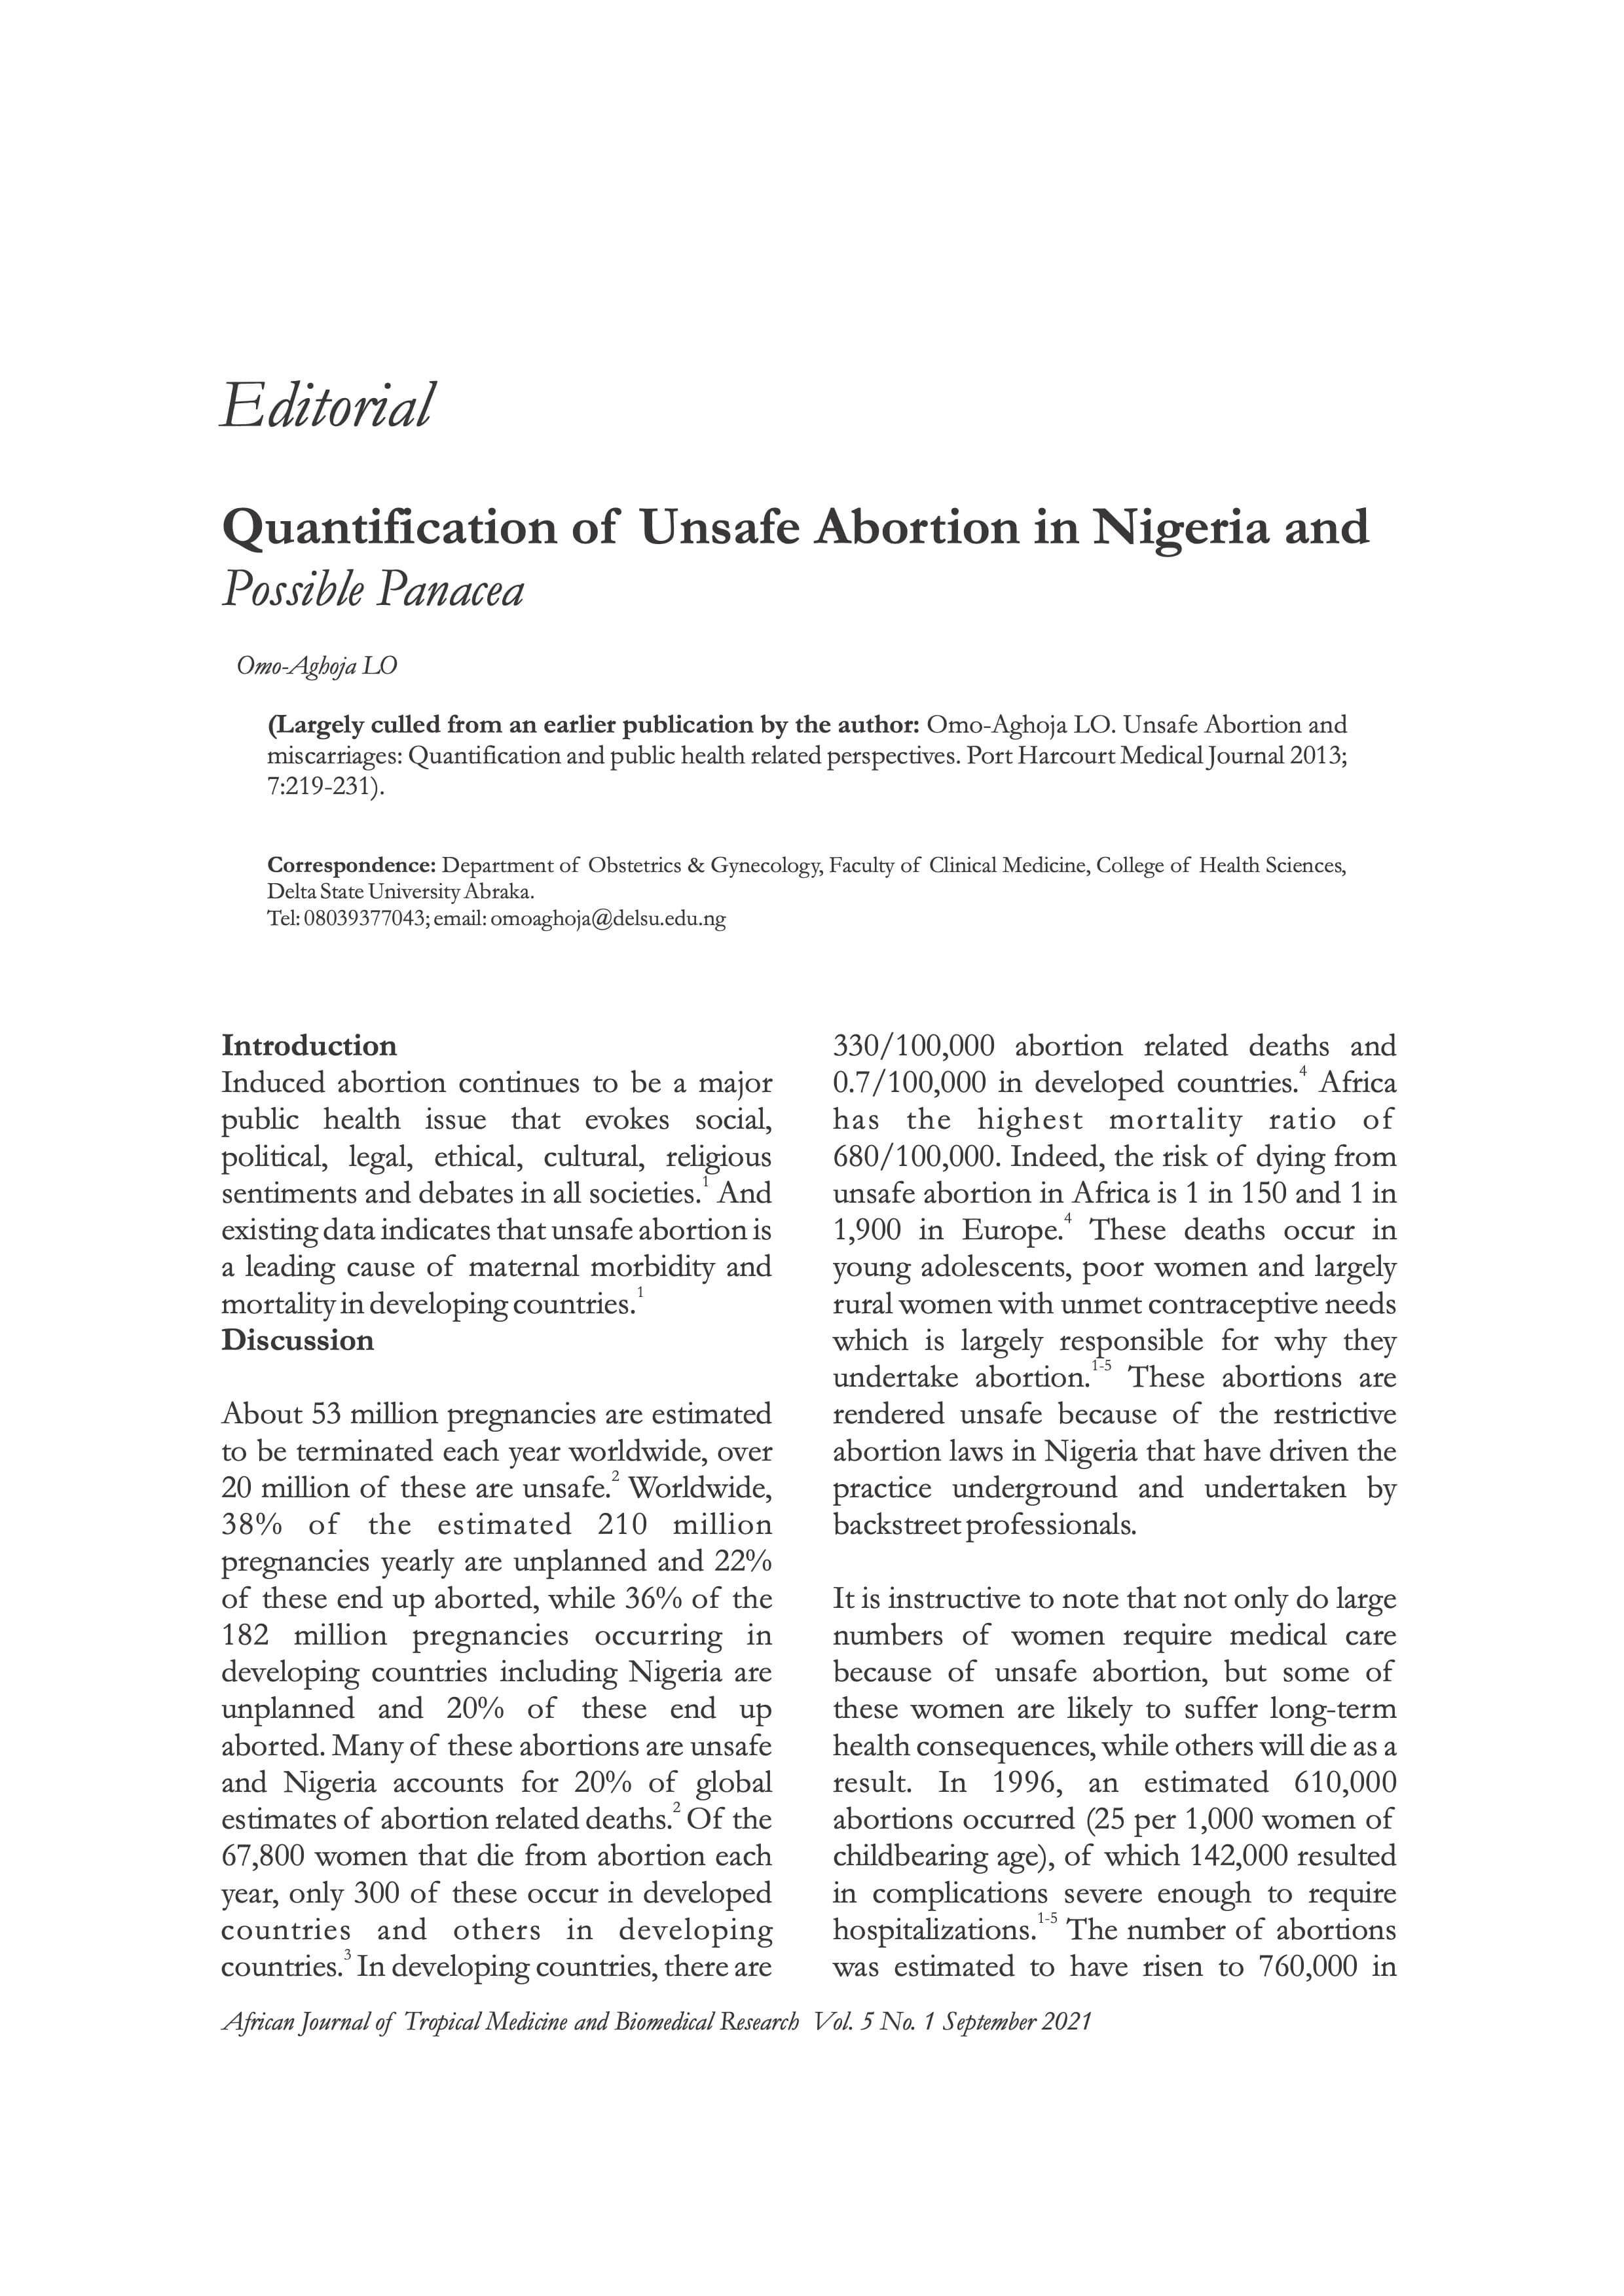 Quantification of Unsafe Abortion in Nigeria and Possible Panacea